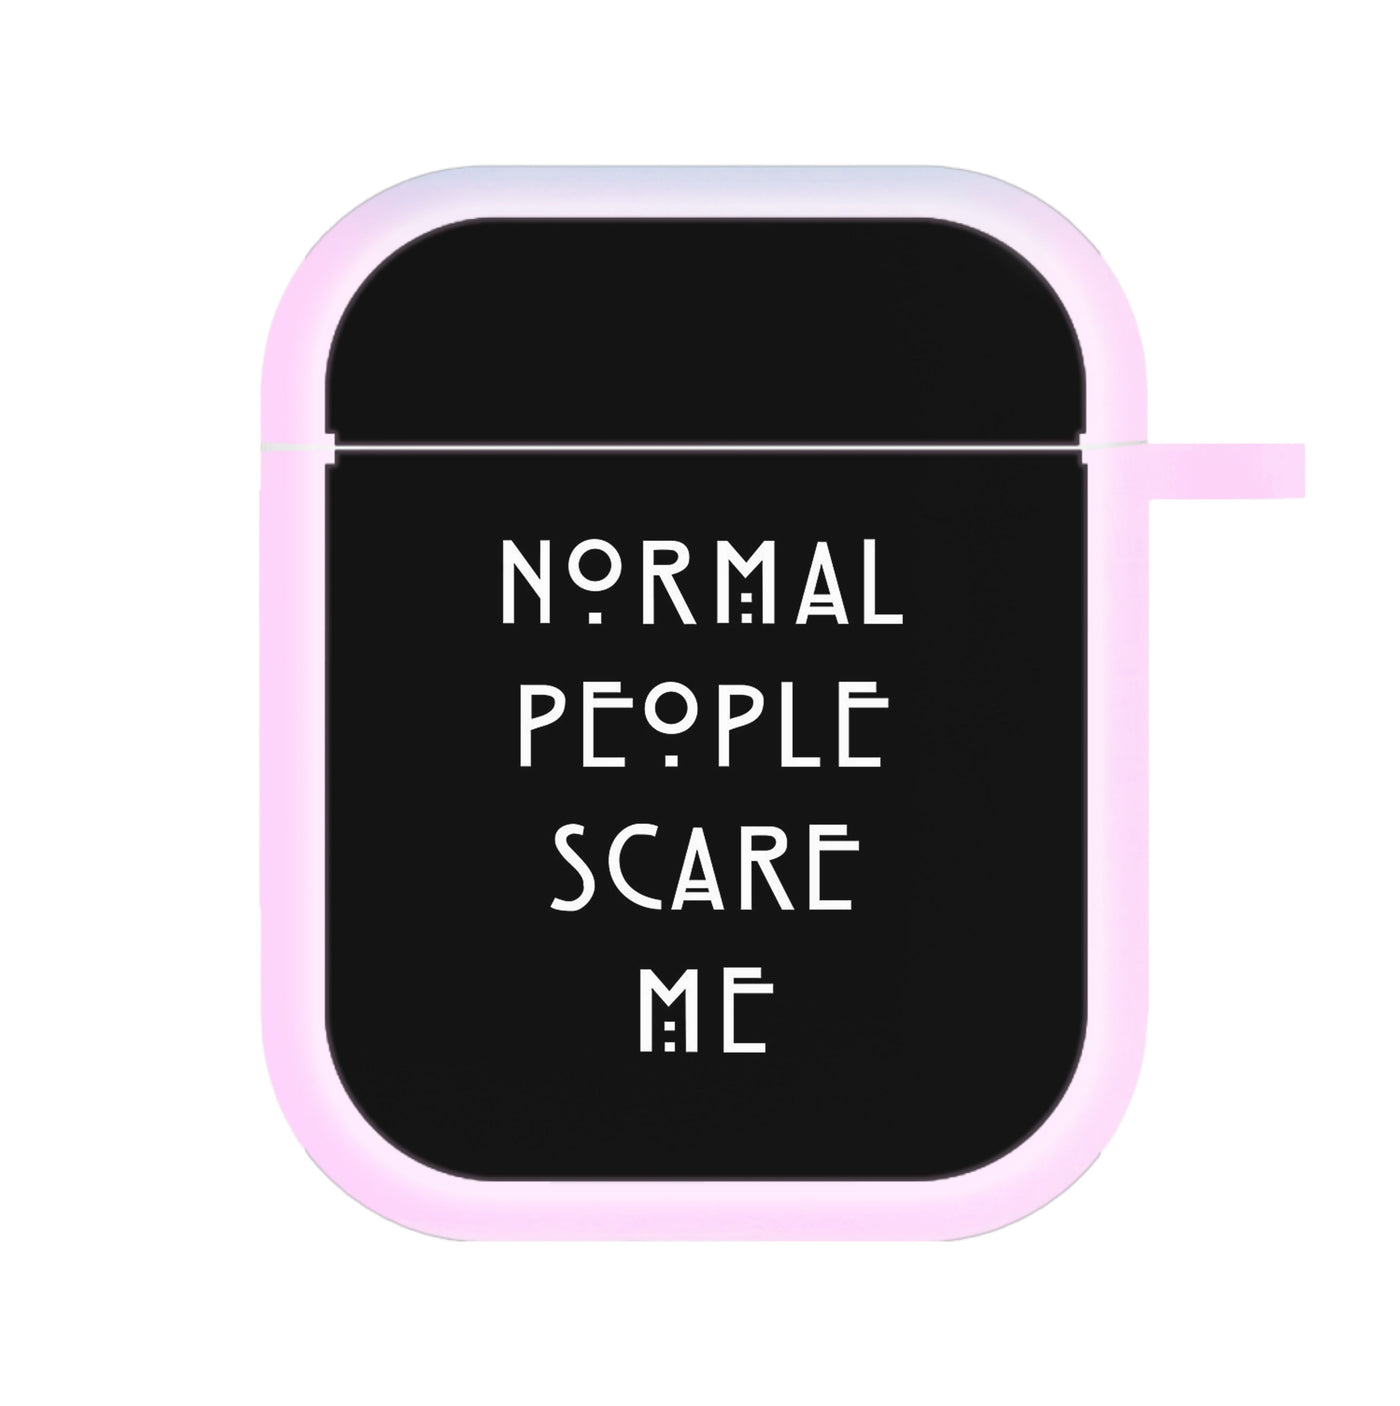 Normal People Scare Me - Black American Horror Story AirPods Case